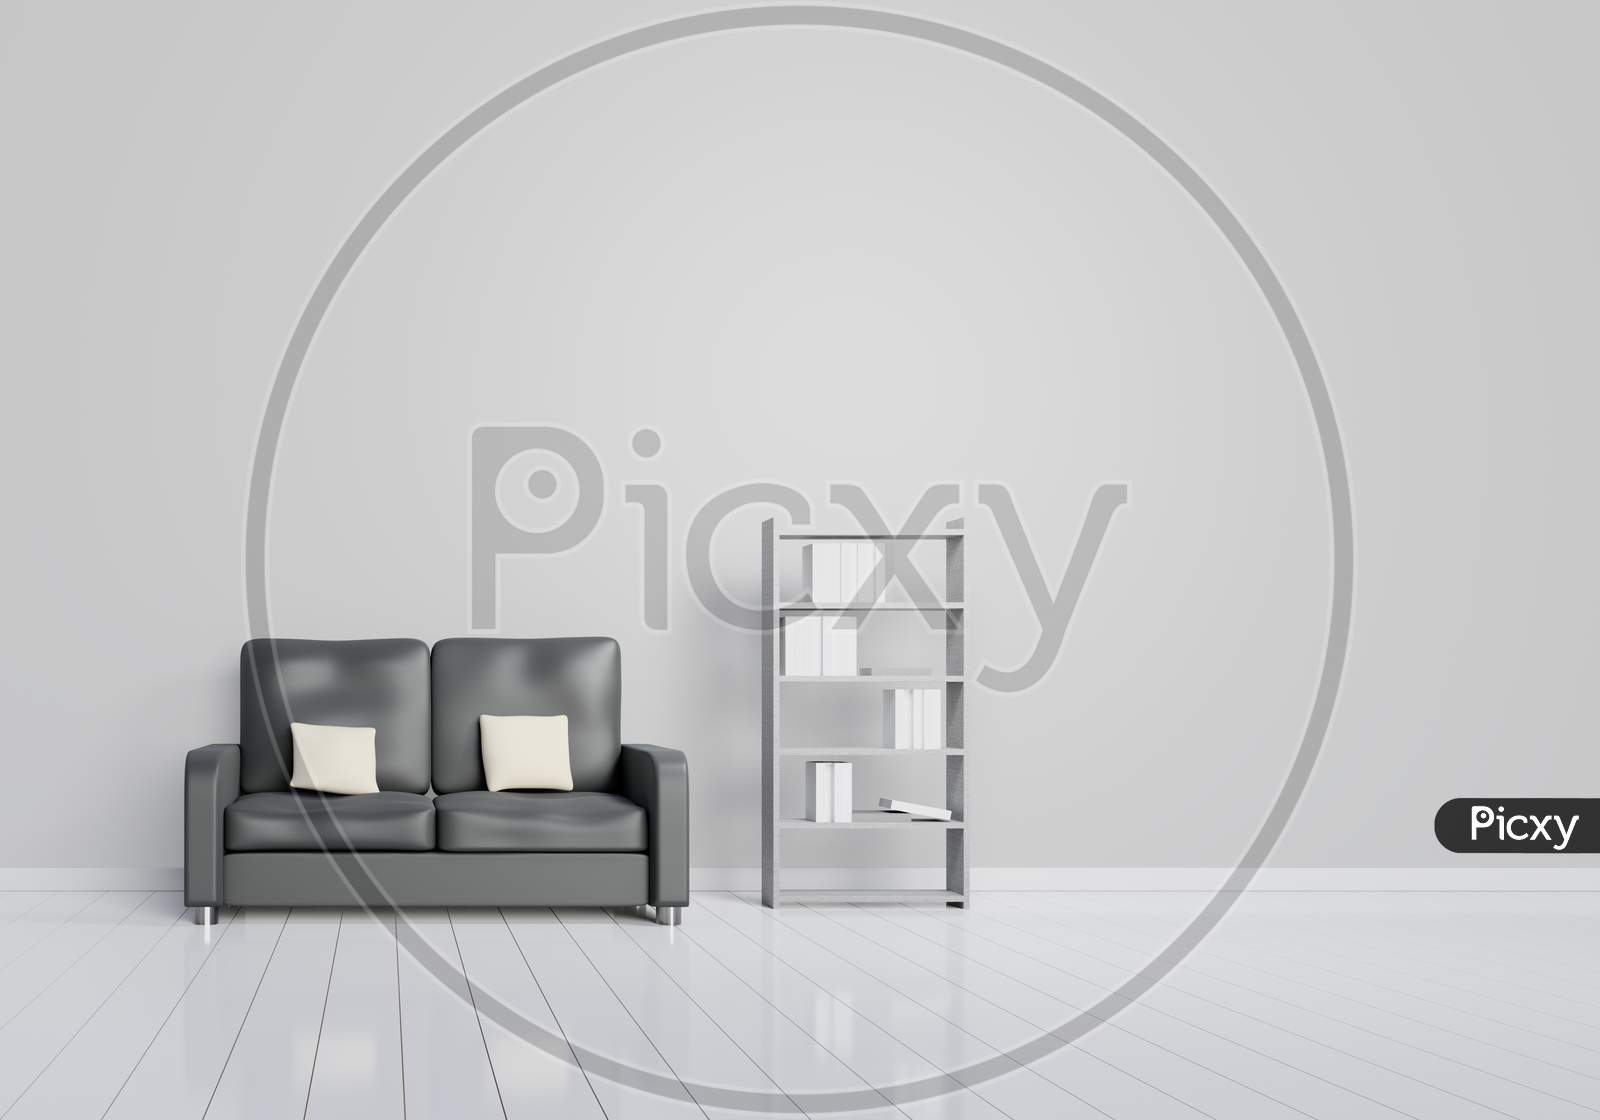 Modern Interior Design Of Living Room With Black Sofa With Grey And Wooden Glossy Floor And Book Shelves. White Cushions Elements. Home And Living Concept. Lifestyle Theme. 3D Illustration Rendering.